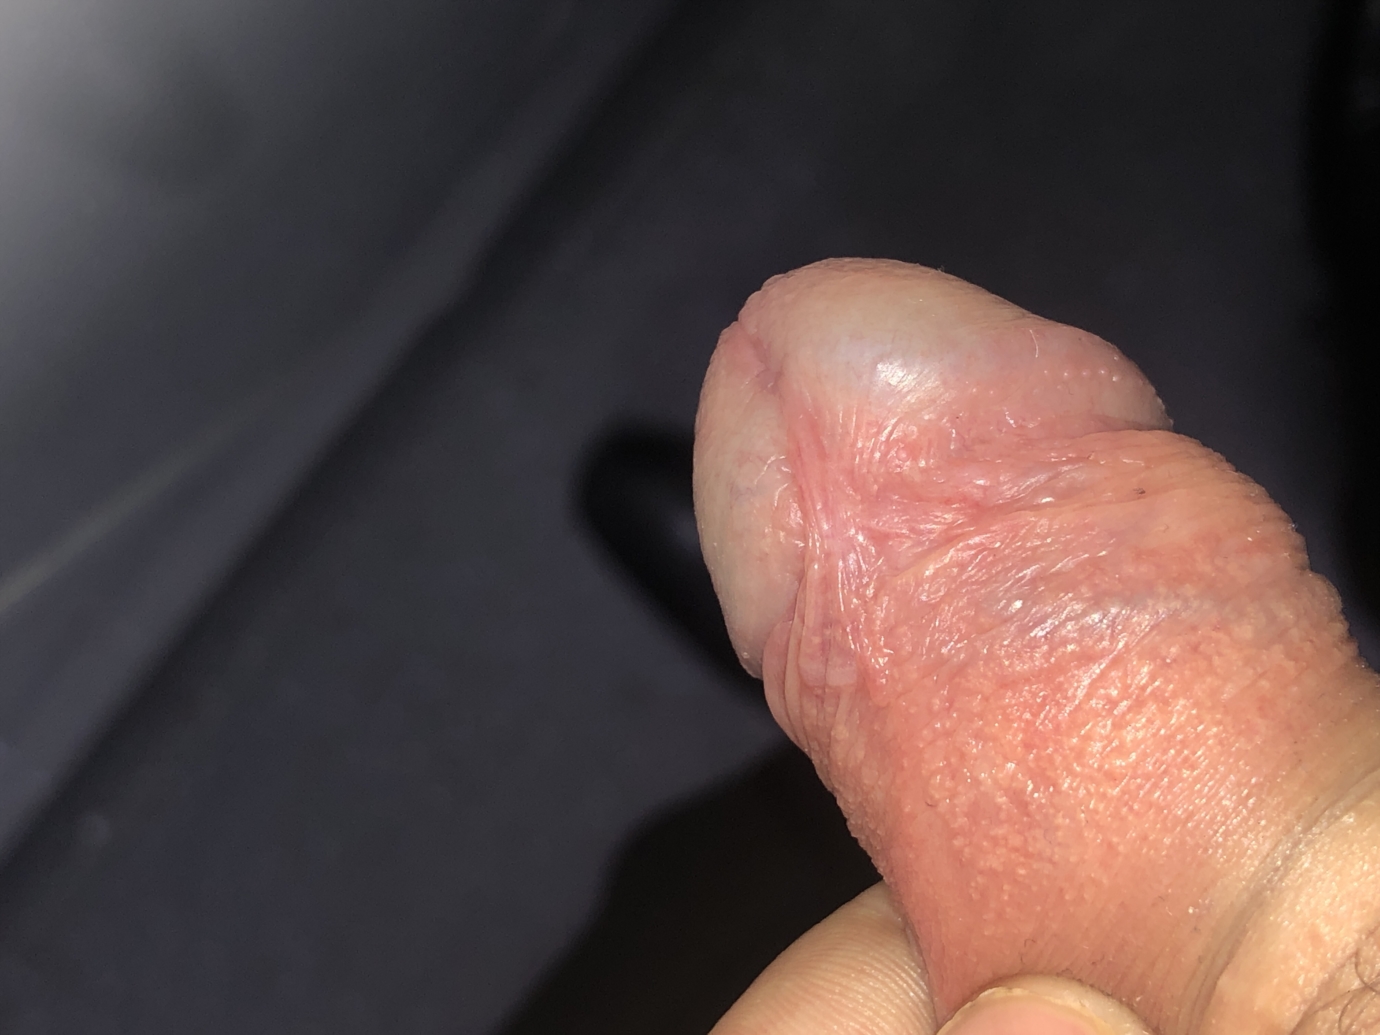 Small white blisters on penis